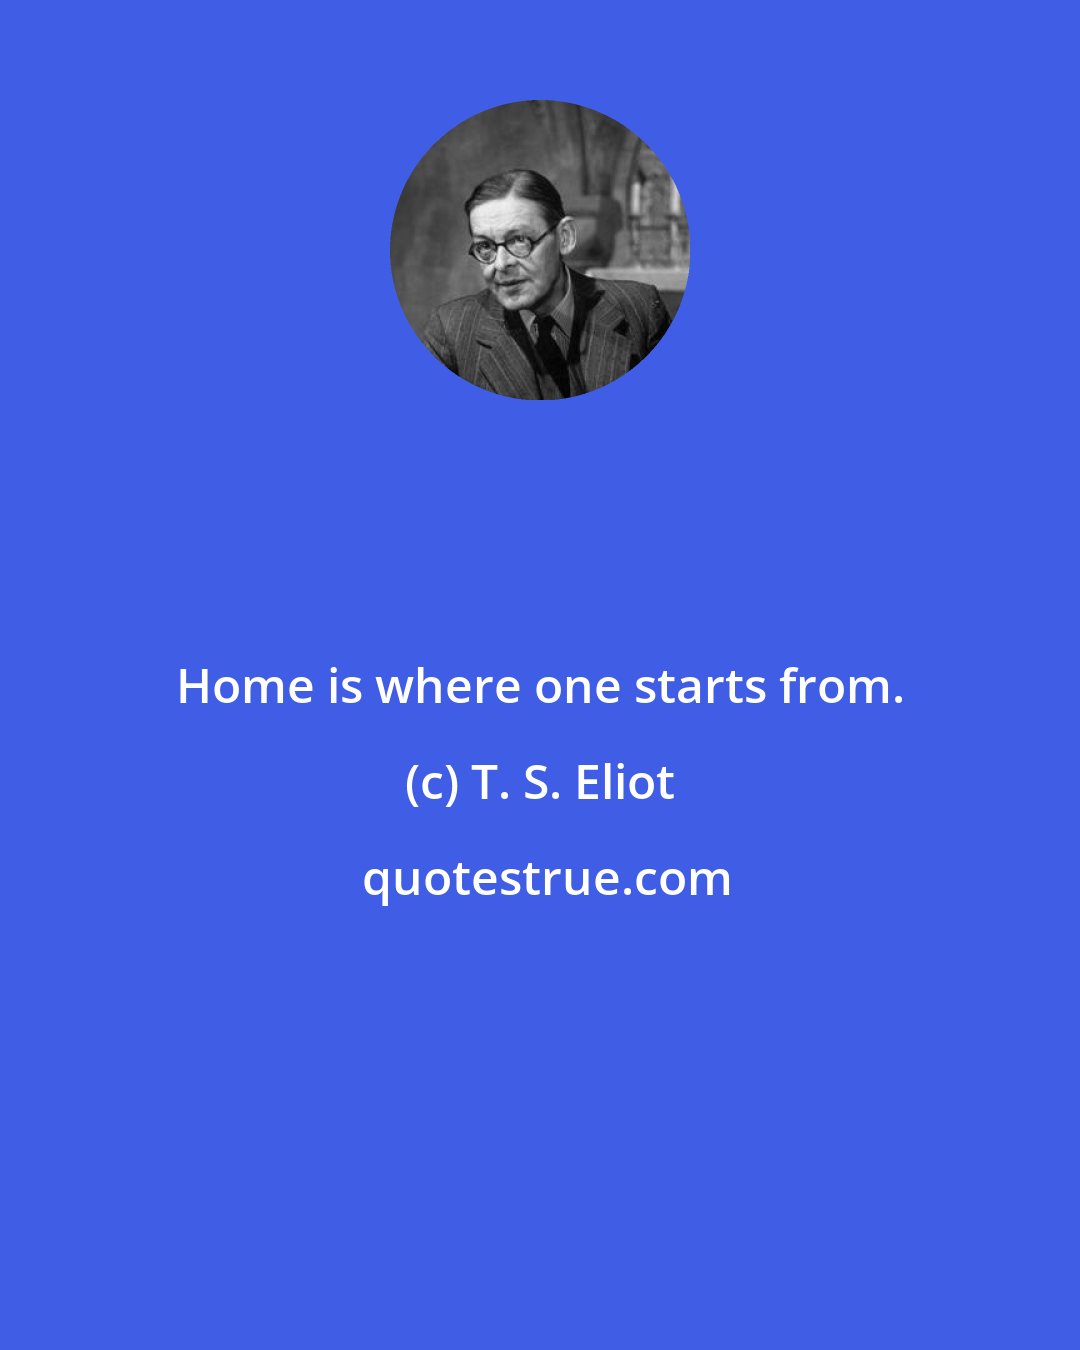 T. S. Eliot: Home is where one starts from.